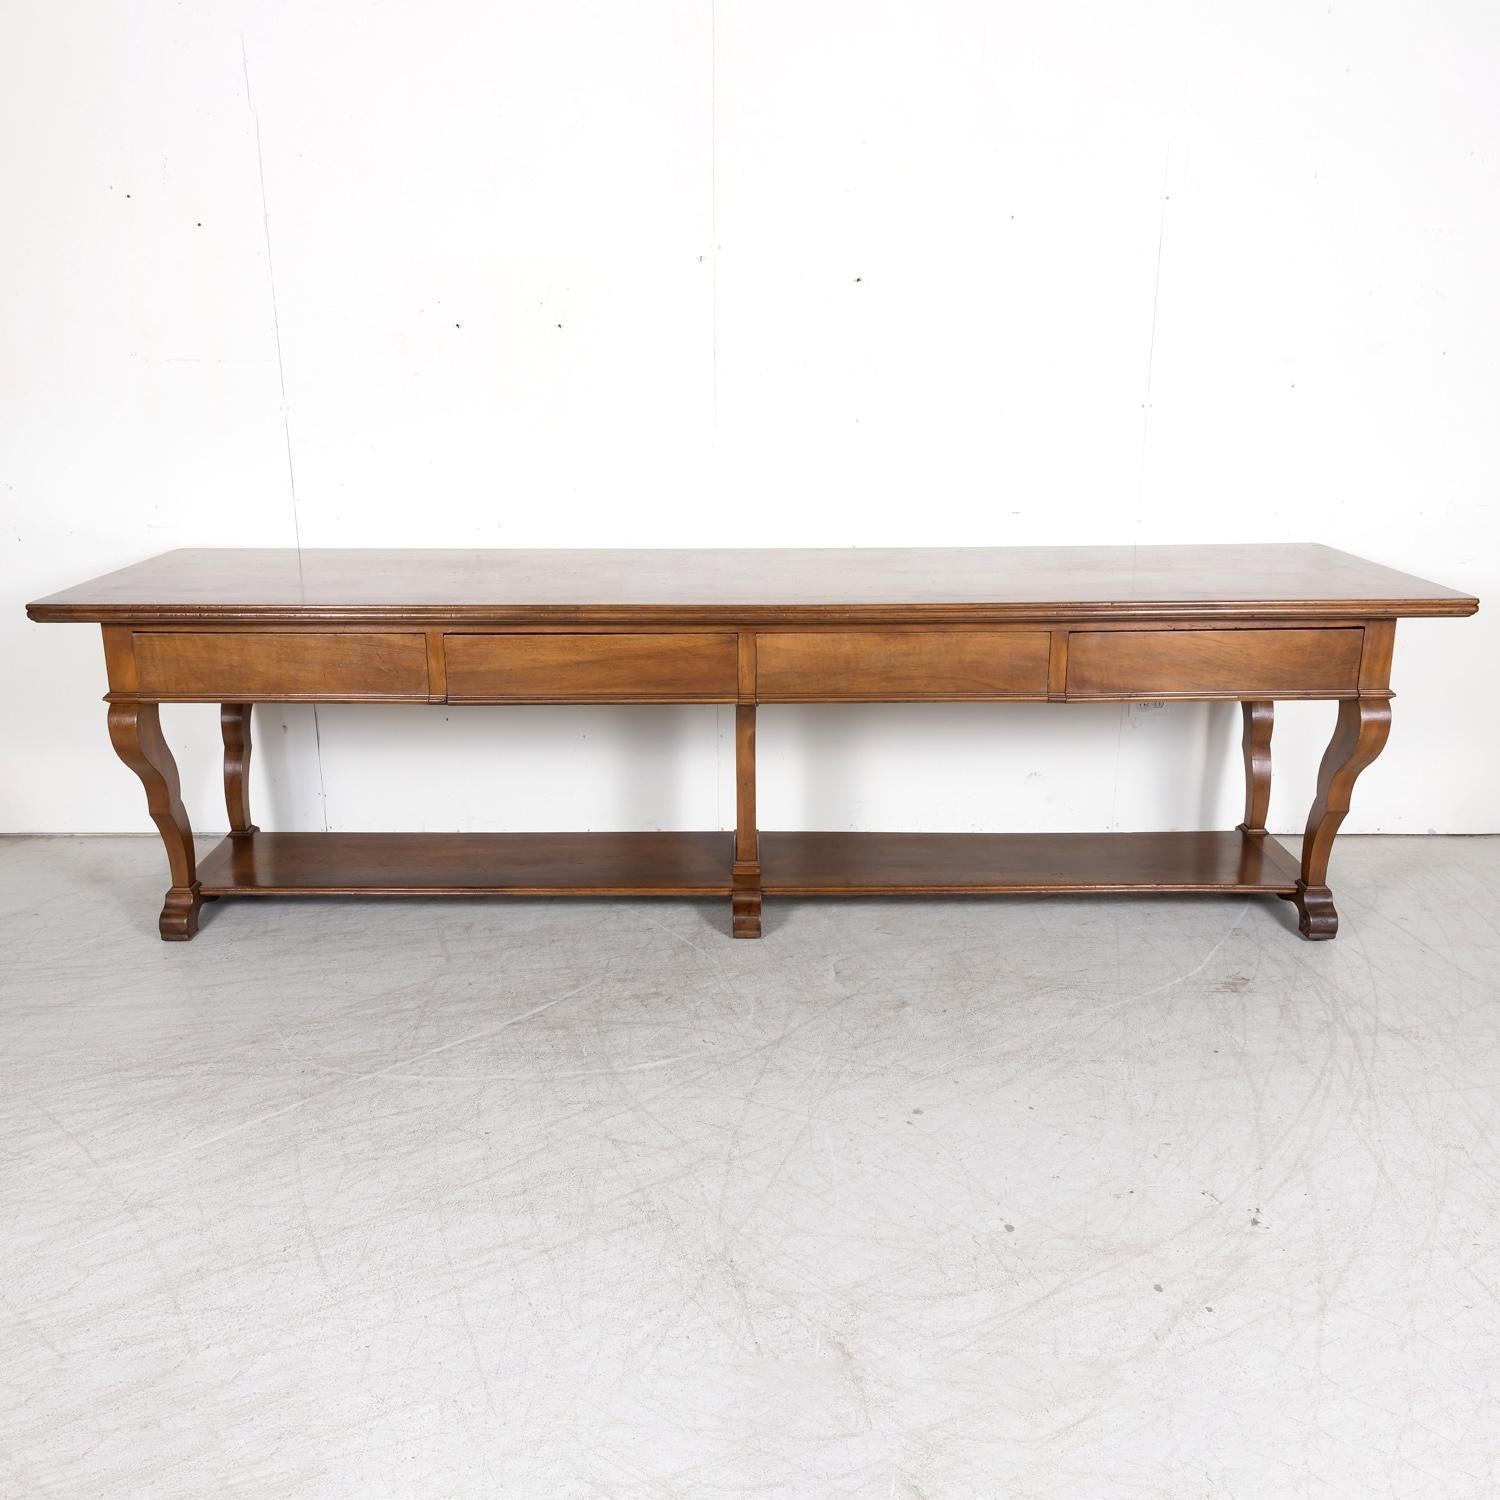 A grand 18th century French Directoire period table de drapier from a draper's atelier in Narbonne, a wealthy port city in Southern France in the Occitanie region, circa 1780s. Handcrafted of solid walnut with a marquetry baguette or band on the